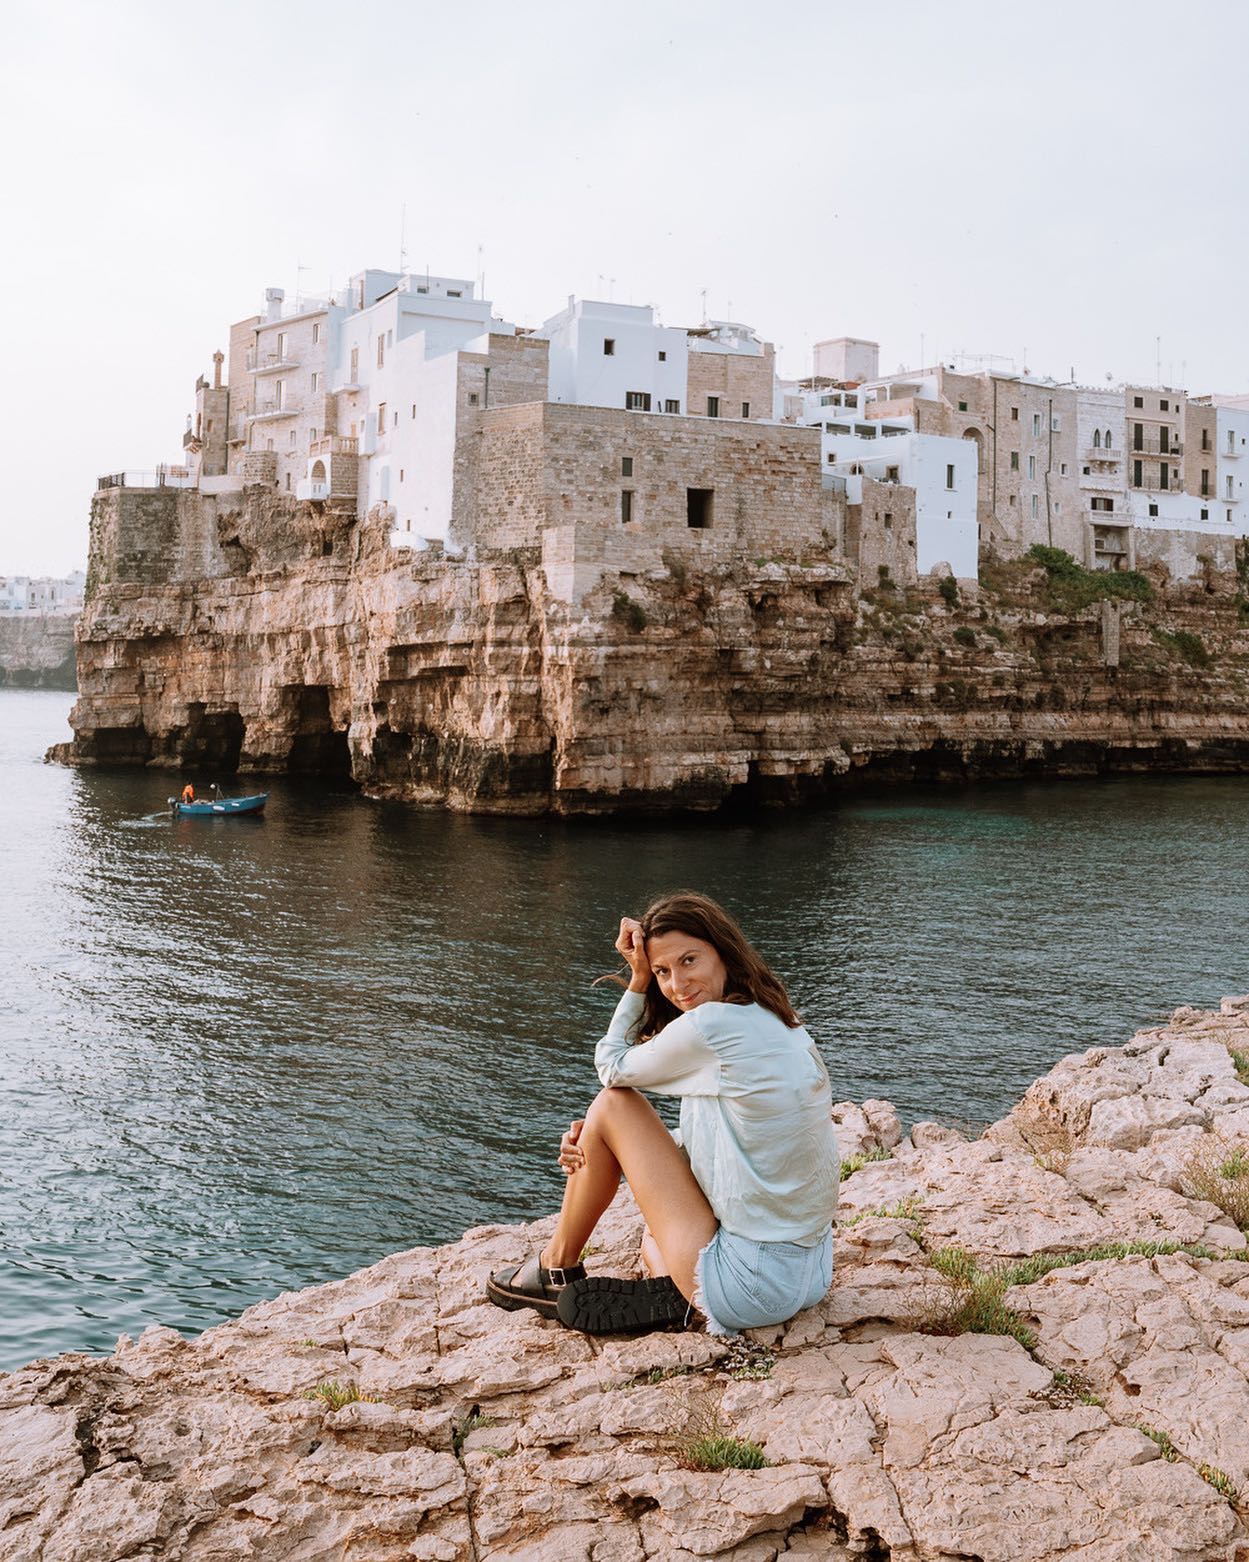 Postcard moments from Puglia 🇮🇹
⠀⠀⠀⠀⠀⠀⠀⠀⠀
There's something about these divine moments in Italy, waking up early, heading out in the early morning, hitting a viewpoint and seeing the most magical, sunrise with nobody else around but local fishermen. 
⠀⠀⠀⠀⠀⠀⠀⠀⠀
Mornings in Puglia are also the calmest- no wind or waves, it's almost like time stood still. As a sunrise person, I'm all about Puglia too, it's without a doubt the best time to be out.
⠀⠀⠀⠀⠀⠀⠀⠀⠀
Have you visited Puglia or Polignano a Mare? Is it on your bucketlist?

#italyiloveyou #ig_italy #polignanoamare #polignano #polignanoamare❤️